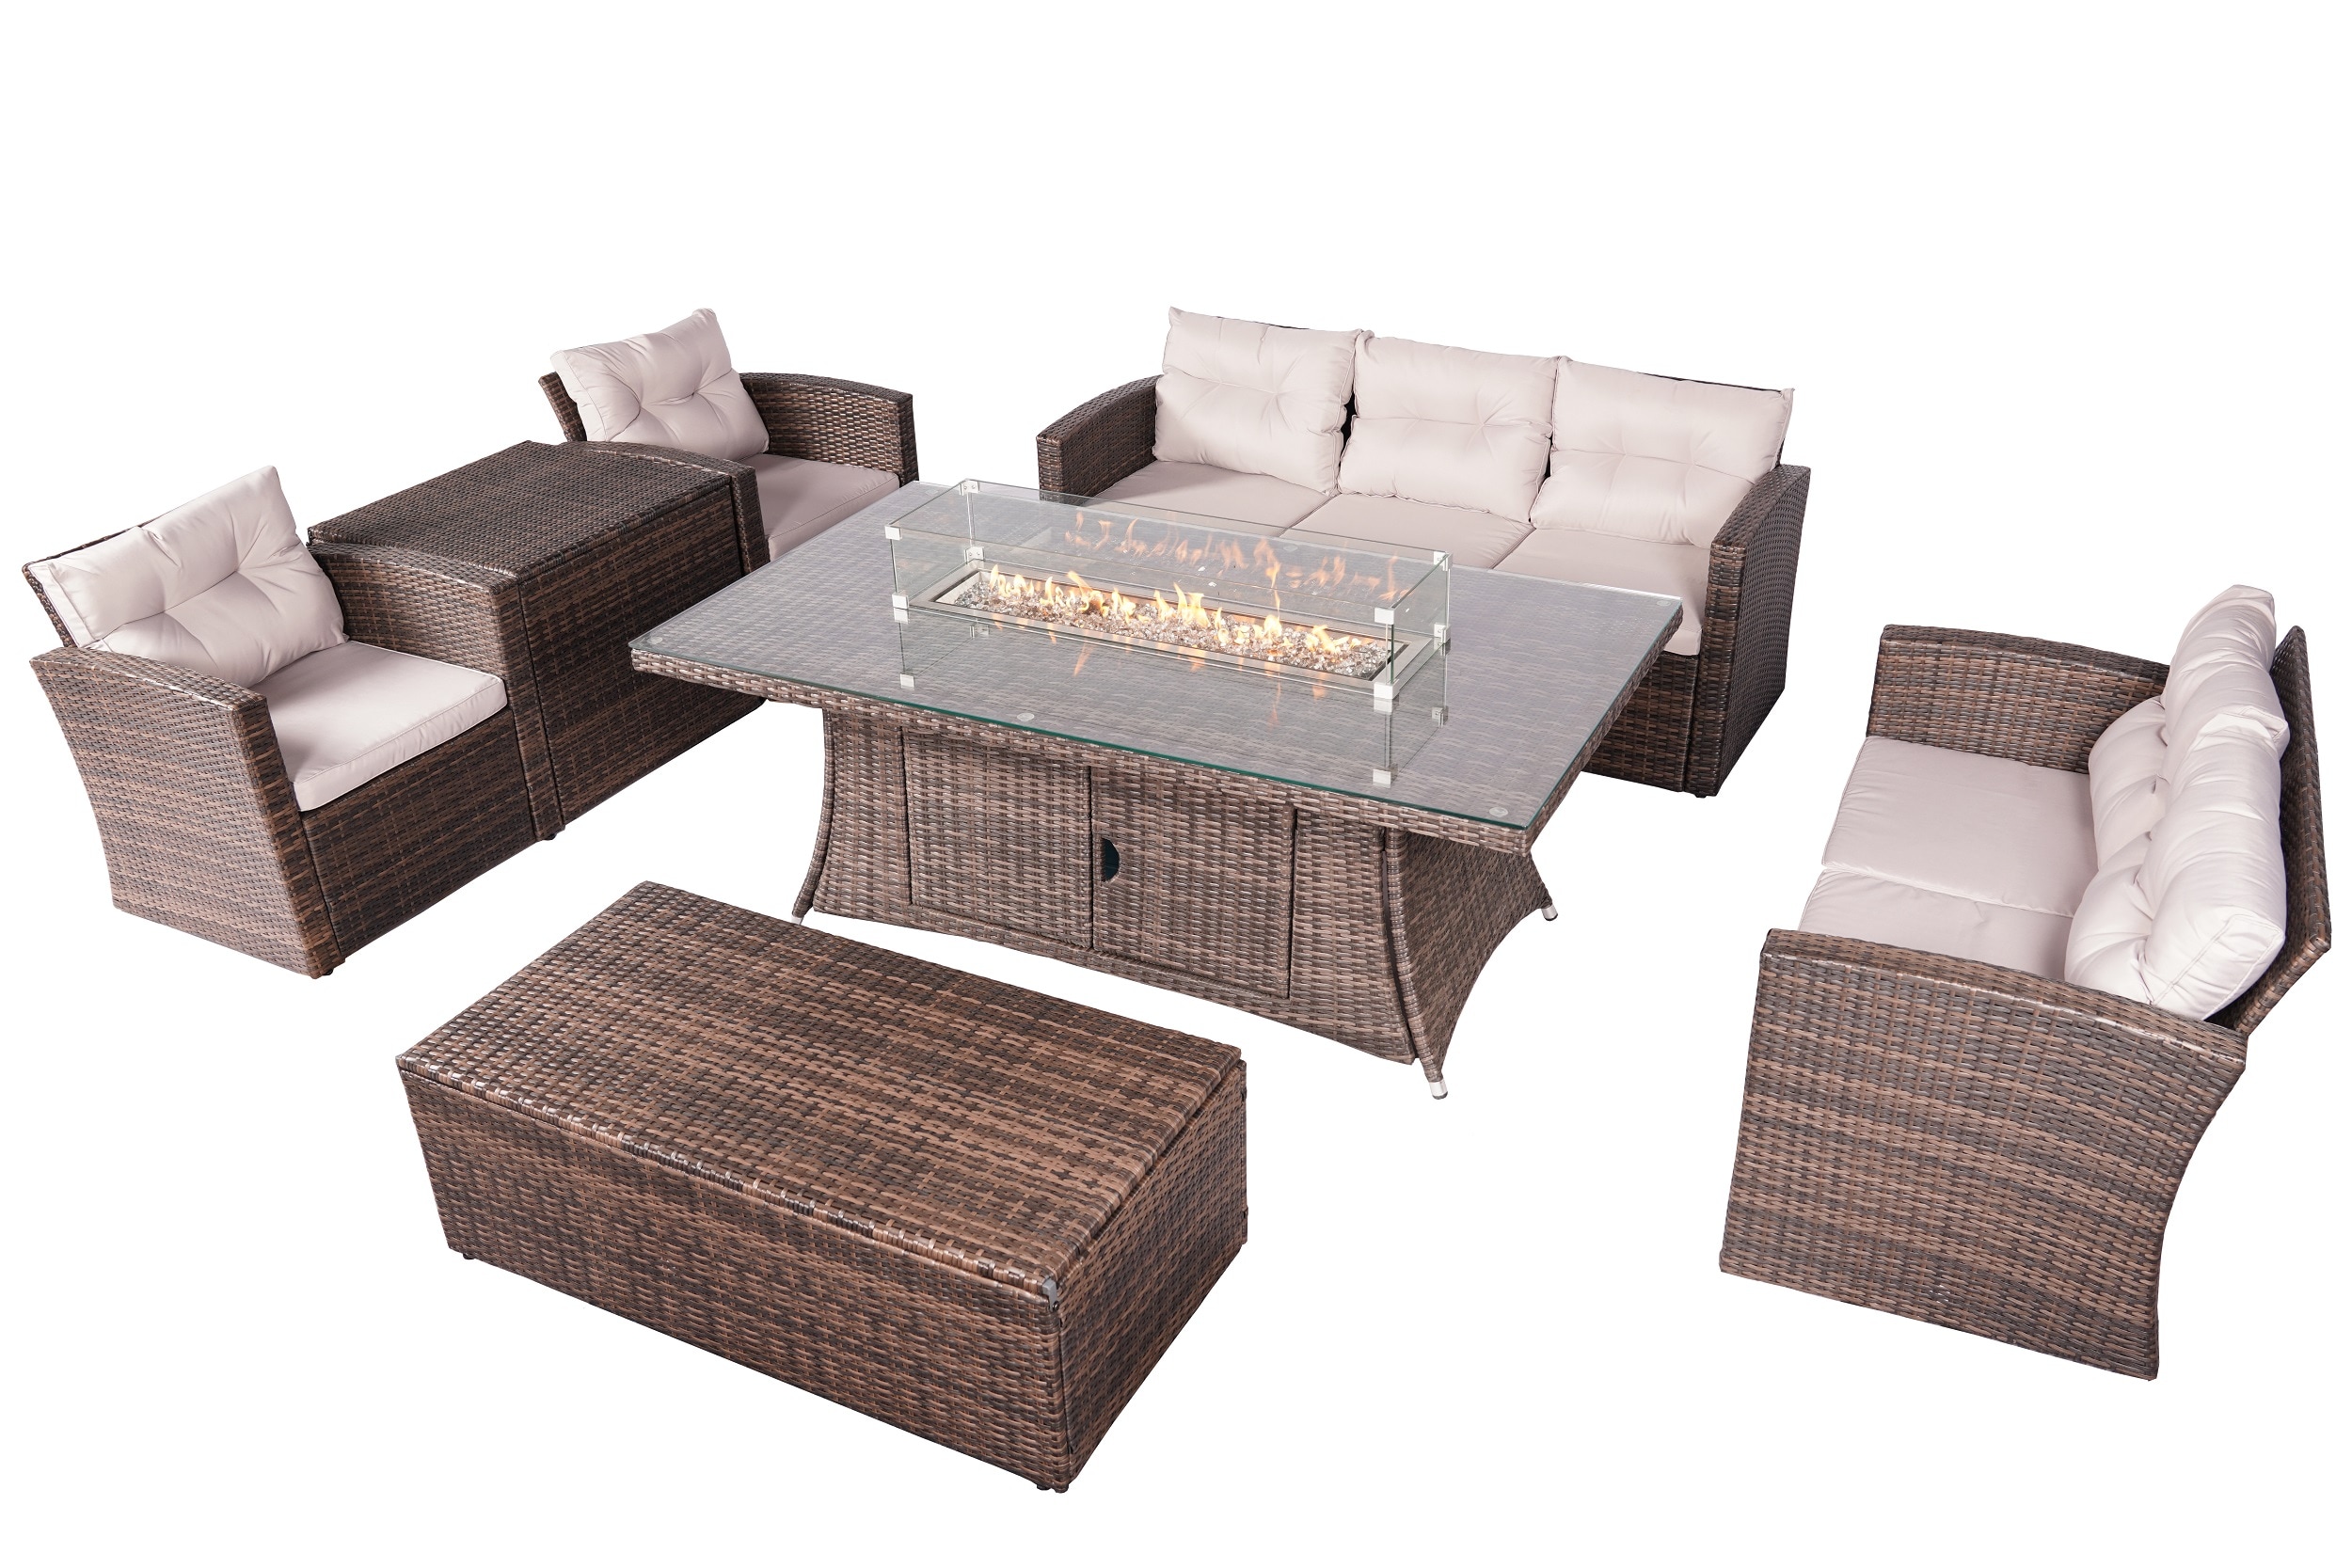  Browse Wicker Patio Sets on Sale!